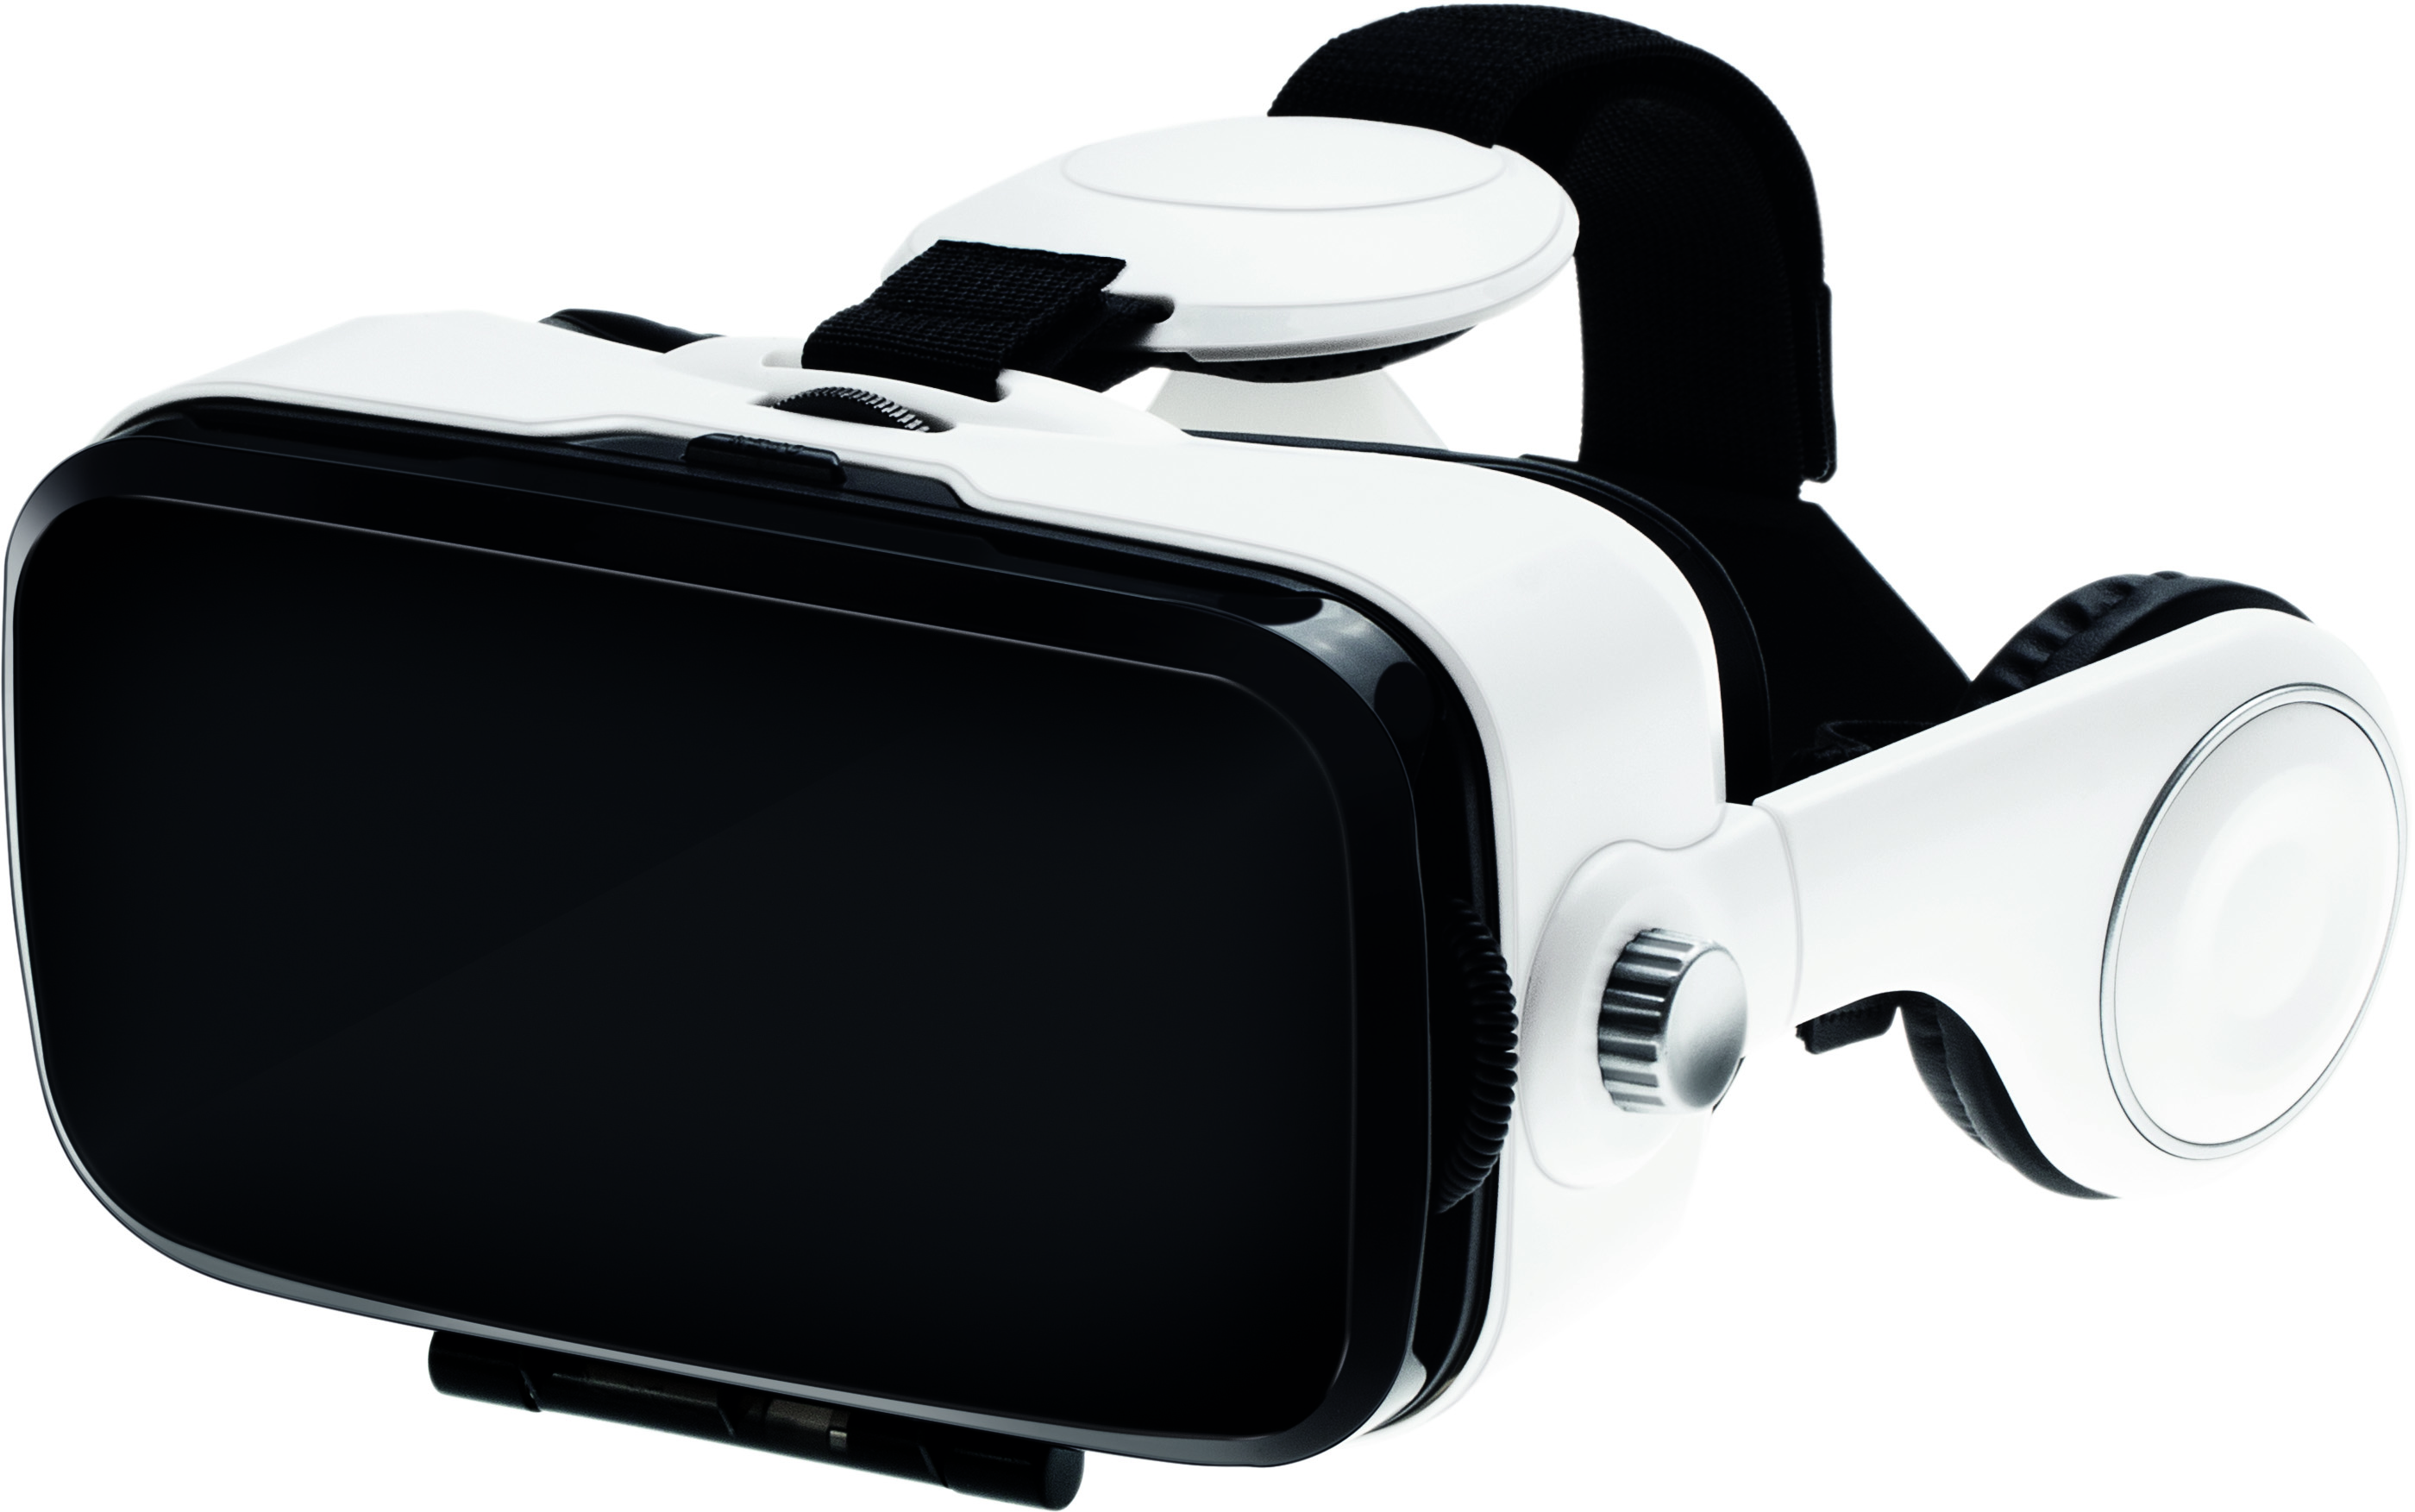 VR glasses (Virtual Reality) with headphones